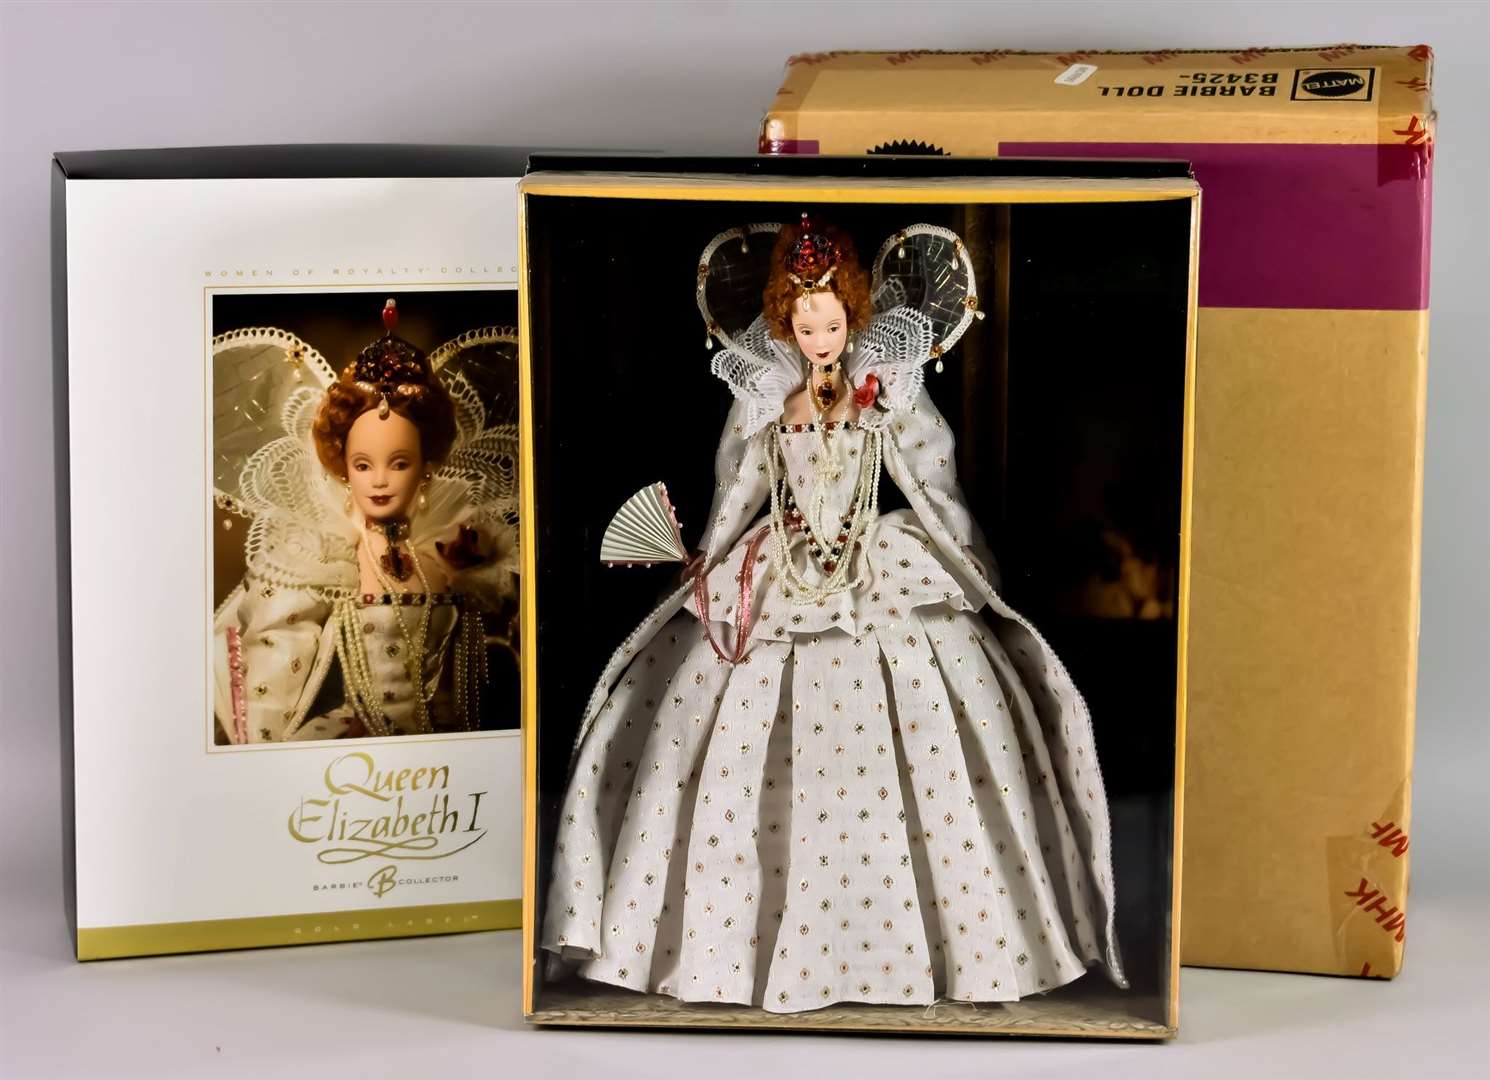 Mattel’s Barbie Woman of Royalty, Queen Elizabeth I, 2004, which is estimated at up to £500